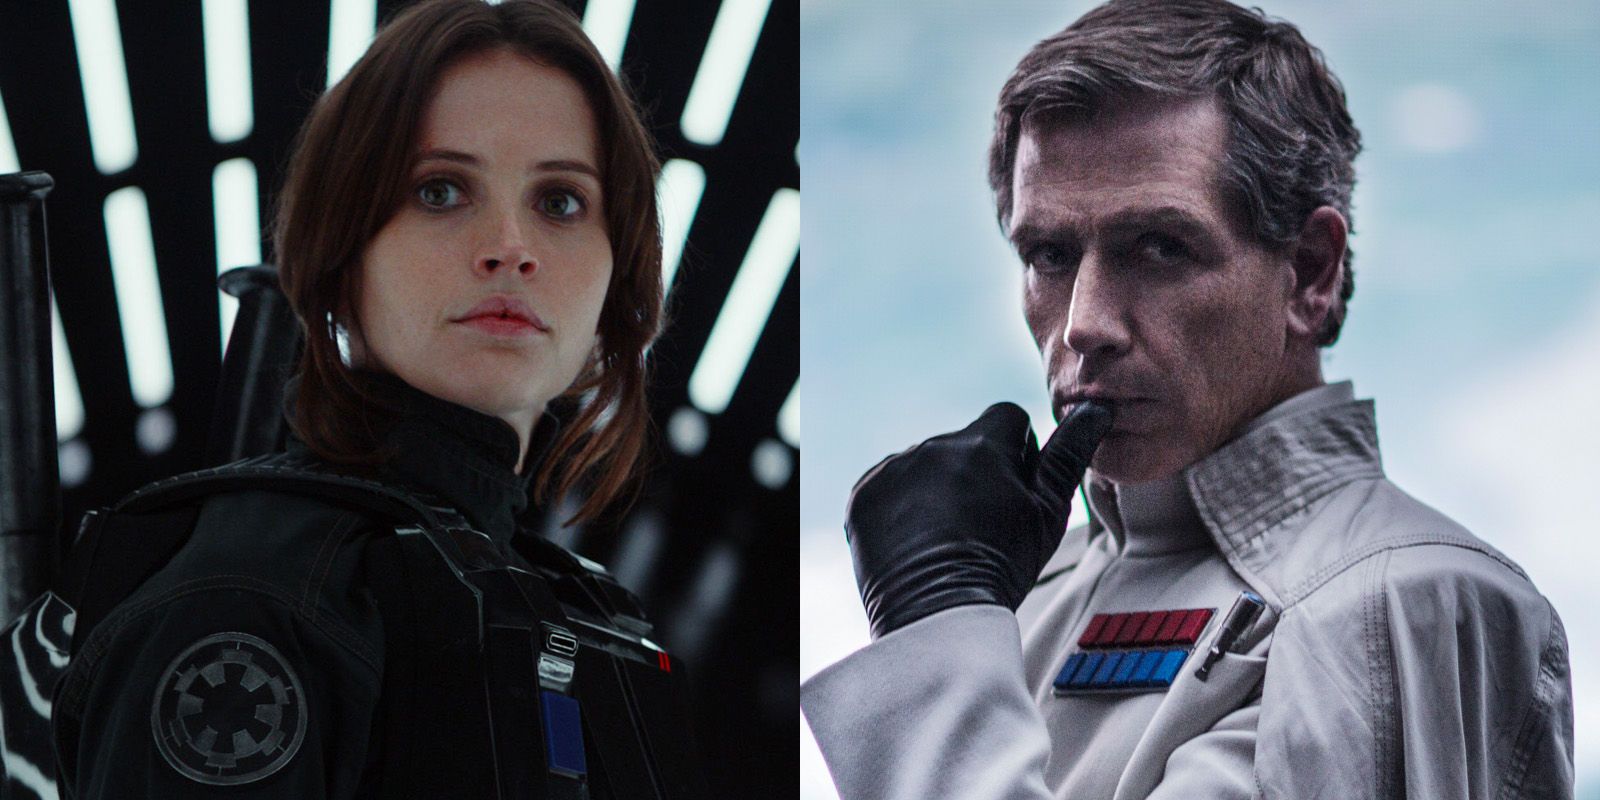 Star Wars: Rogue One - Jyn Erso and Orson Krennic